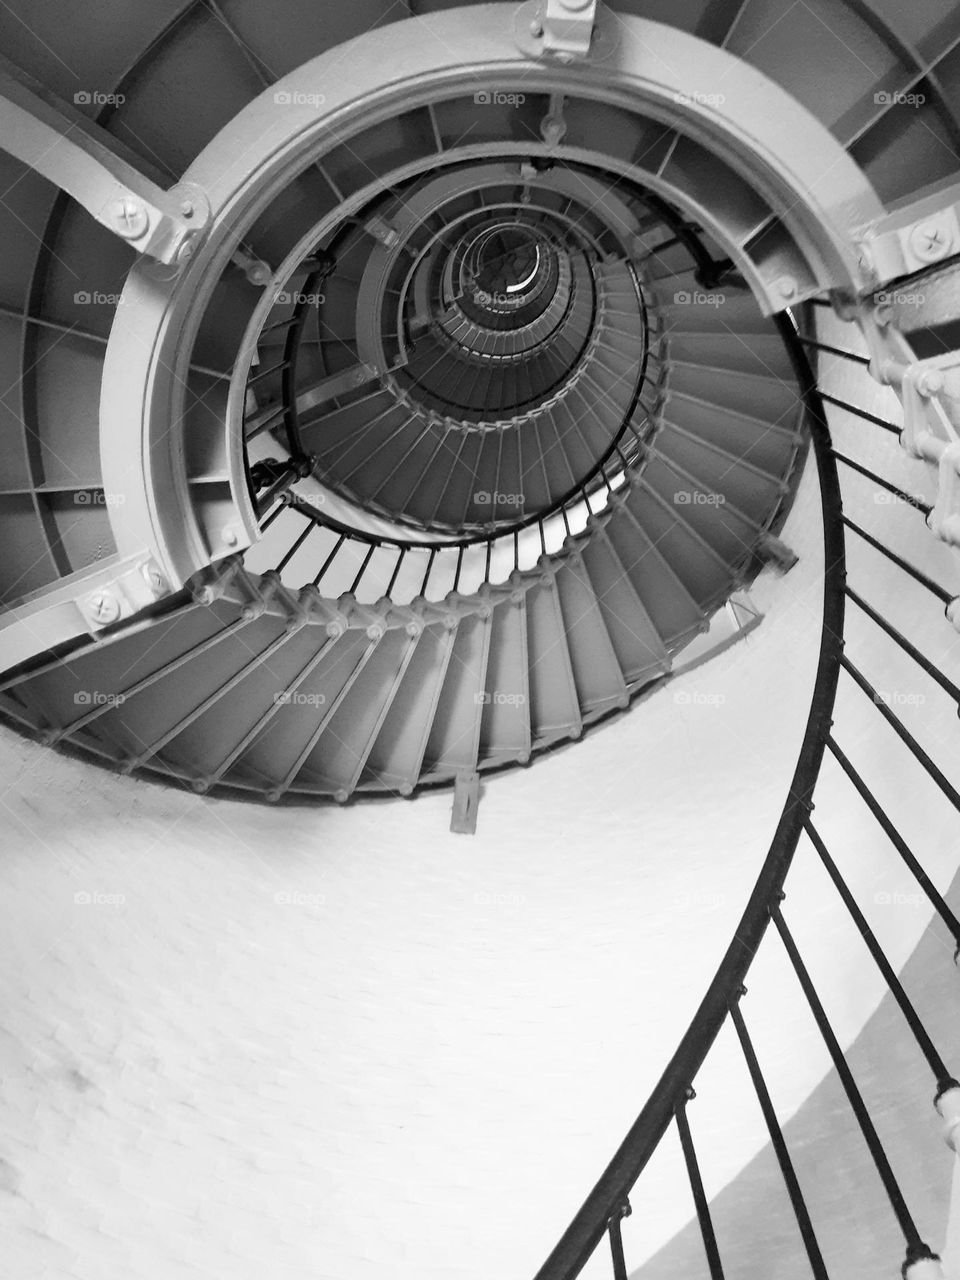 A black and white photo of the steep spiral staircase of the Ponce Inlet Lighthouse taken from below.